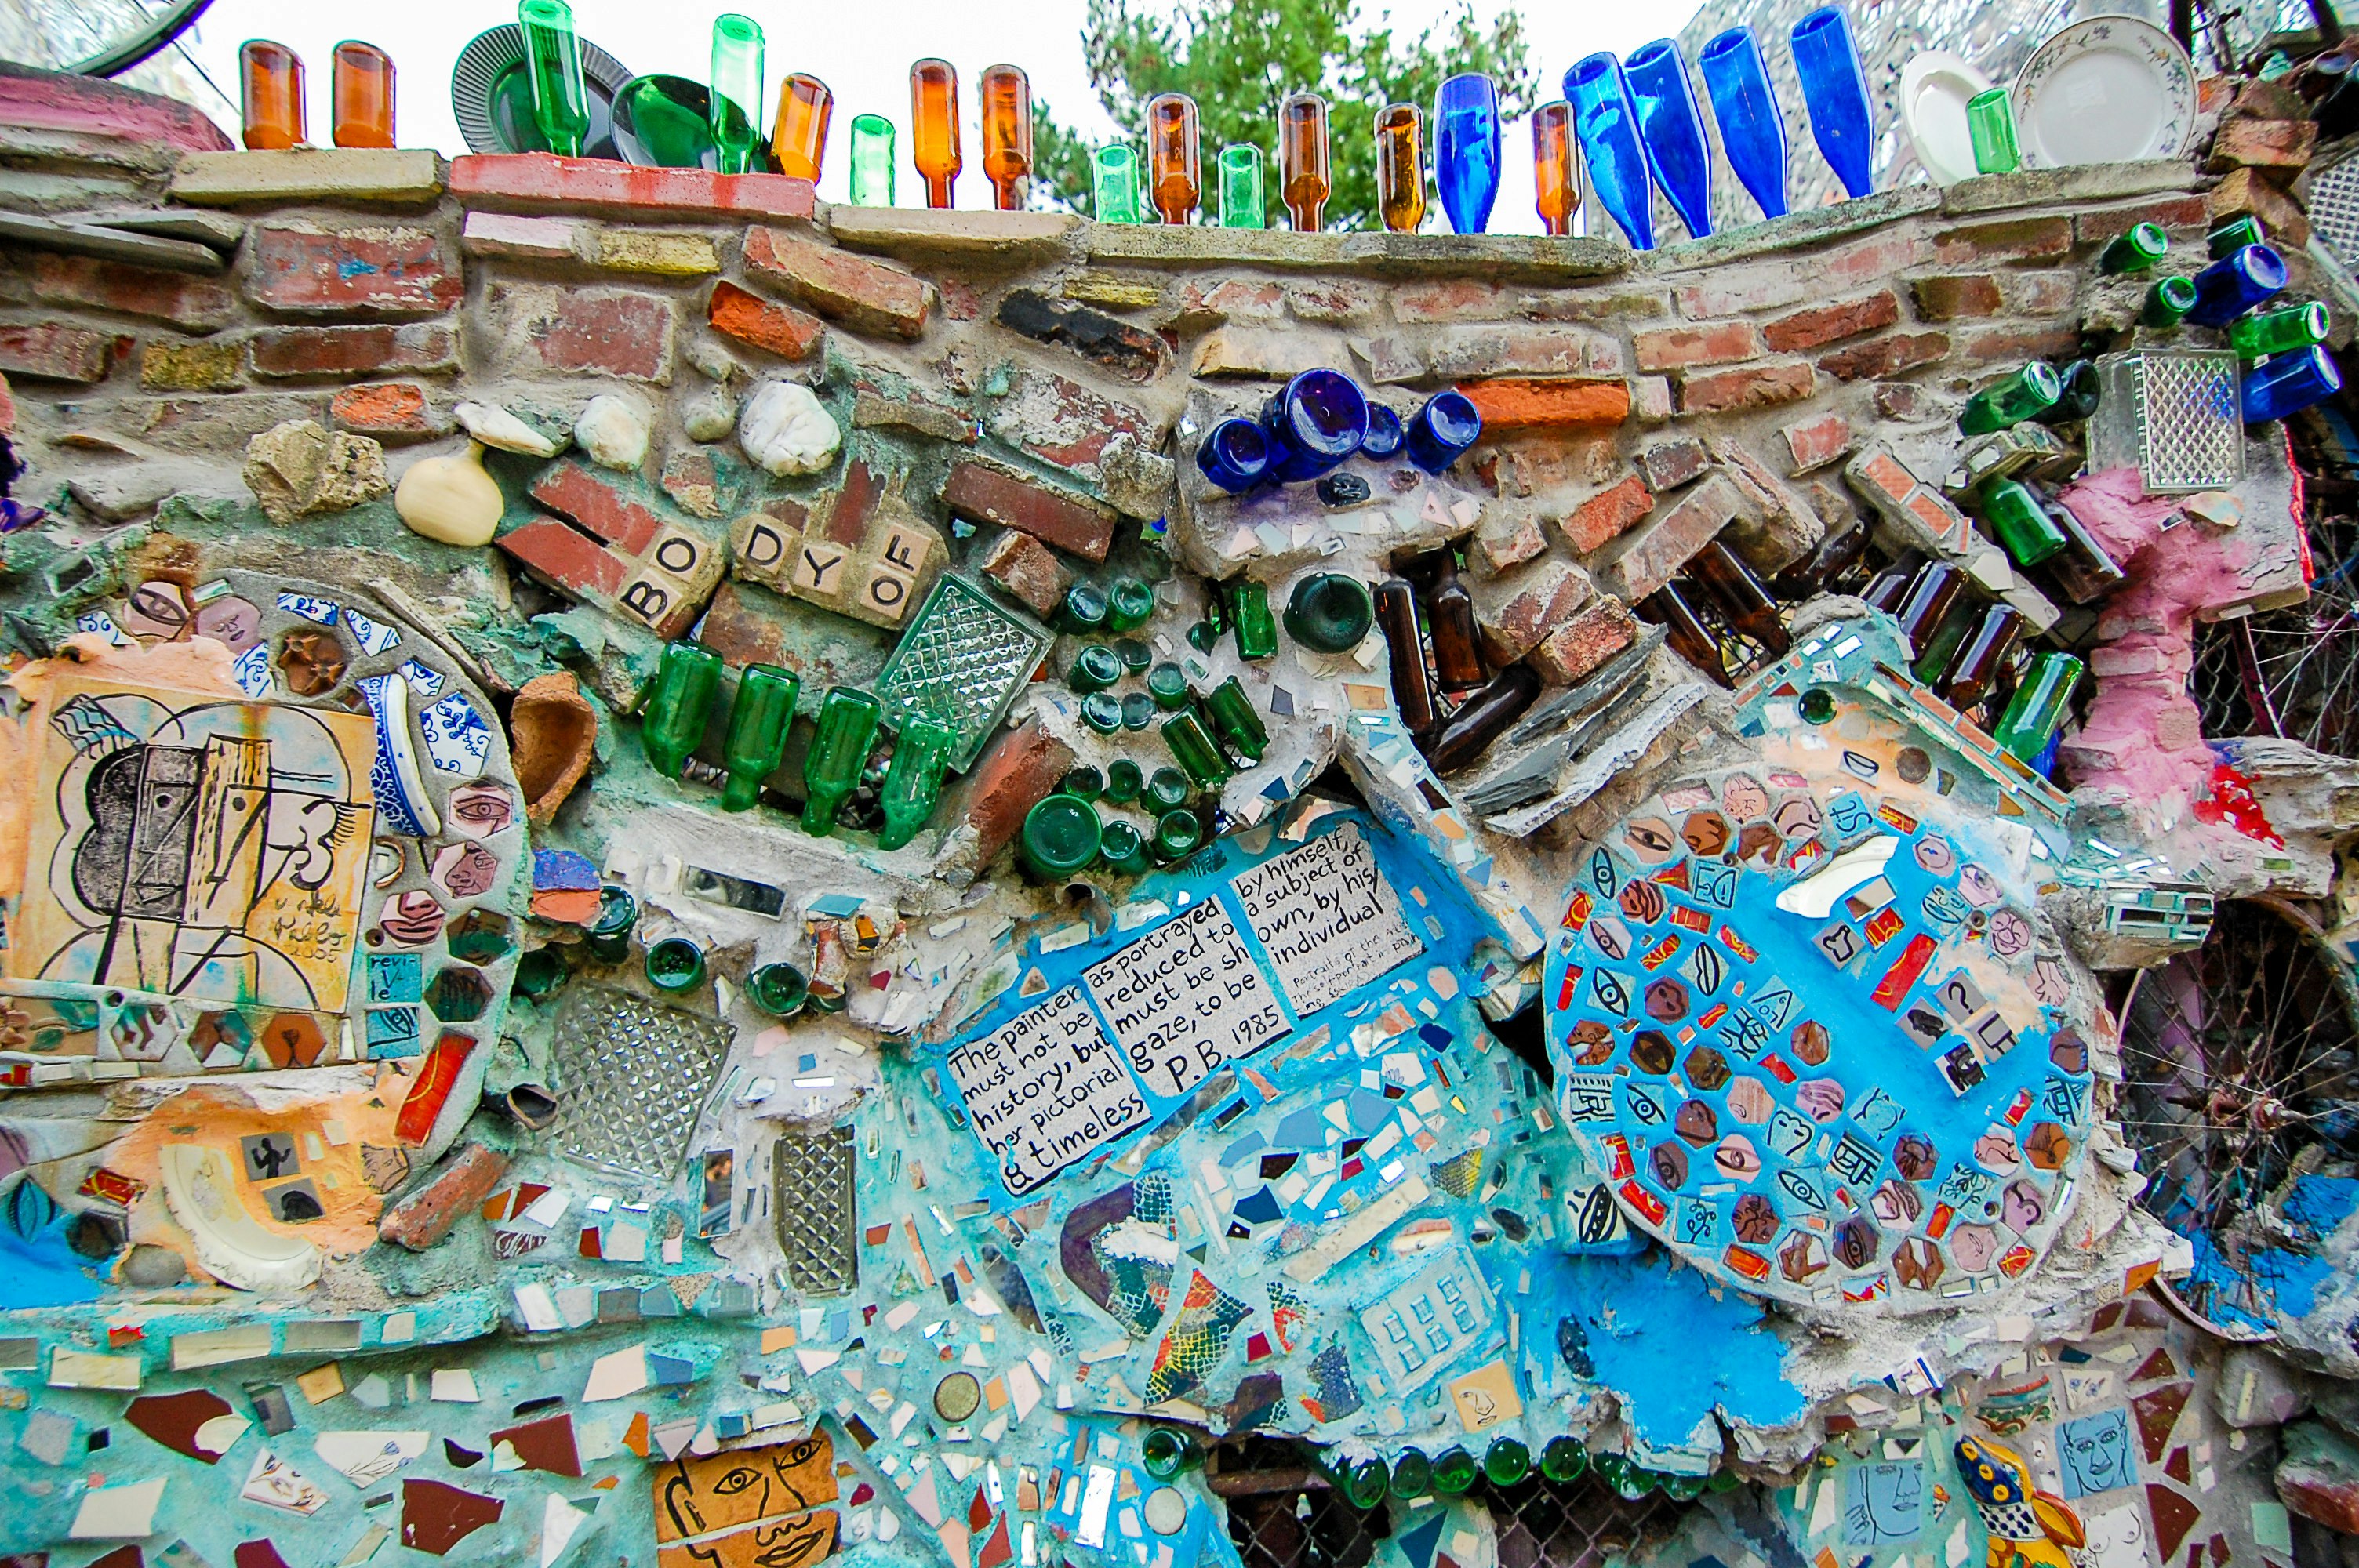 Glass bottles and other ceramics are dug into a wall at Philadelphia’s Magic Gardens